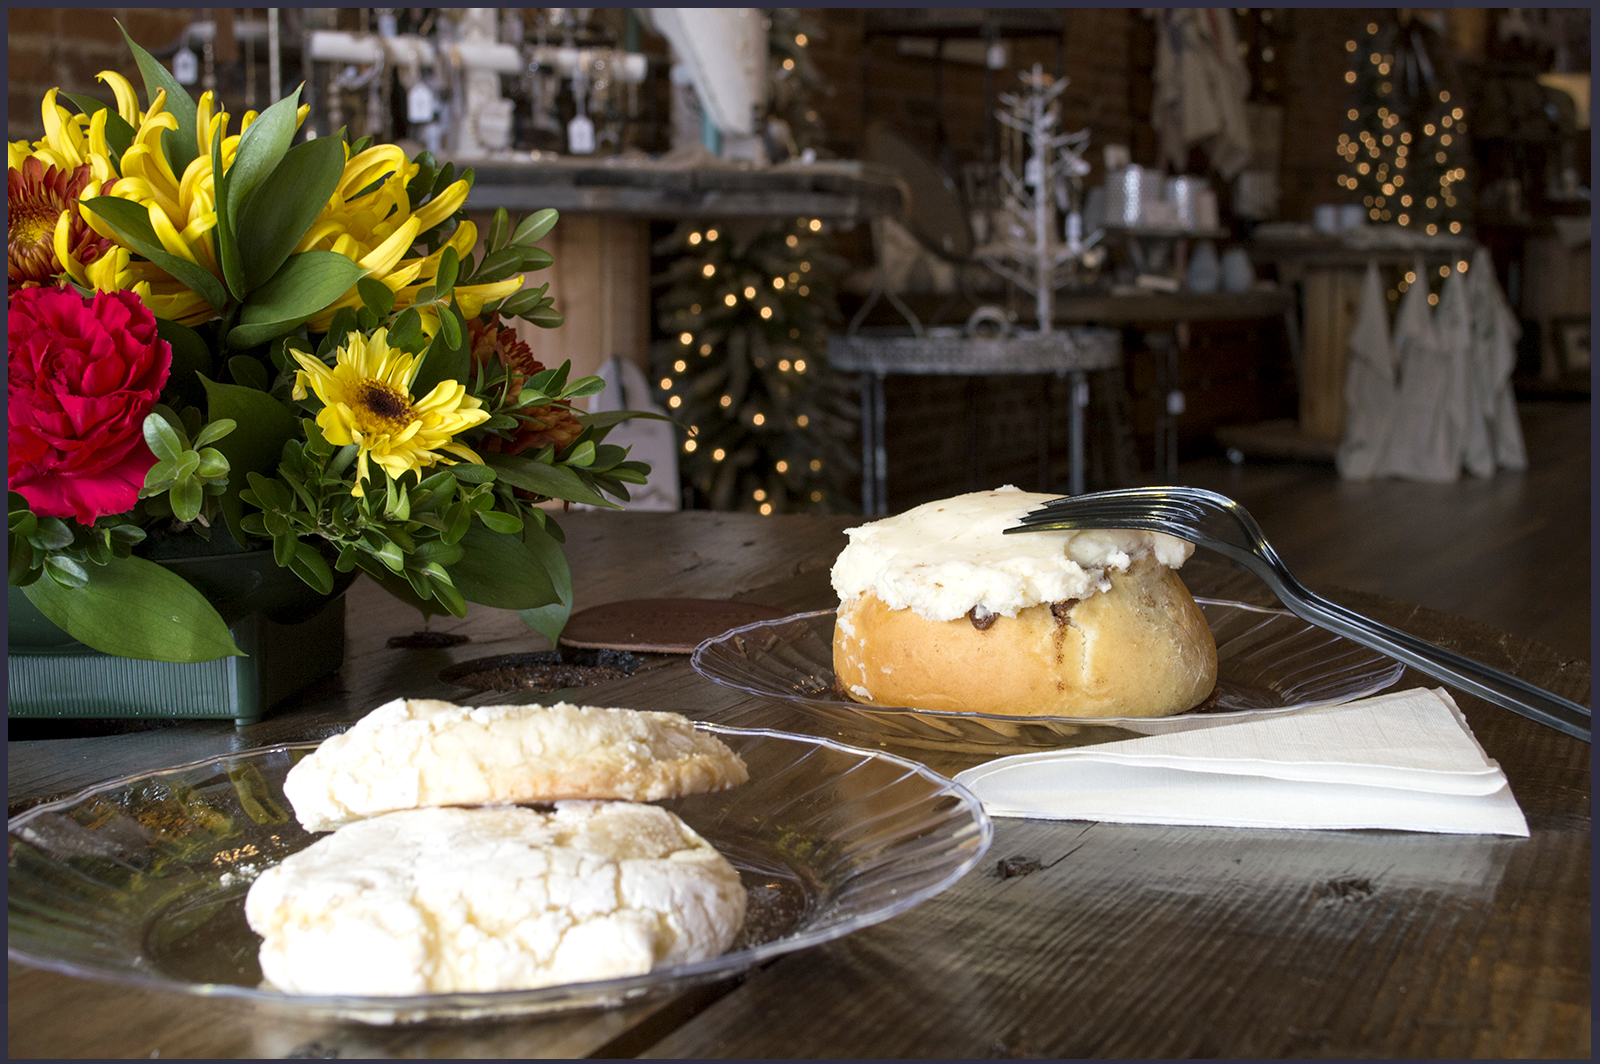 Two lemon butter cookies on a clear plastic plate in the front left and a large icing-covered cinnamon roll on a plate behind it to the right with a pot of flowers to the far left.